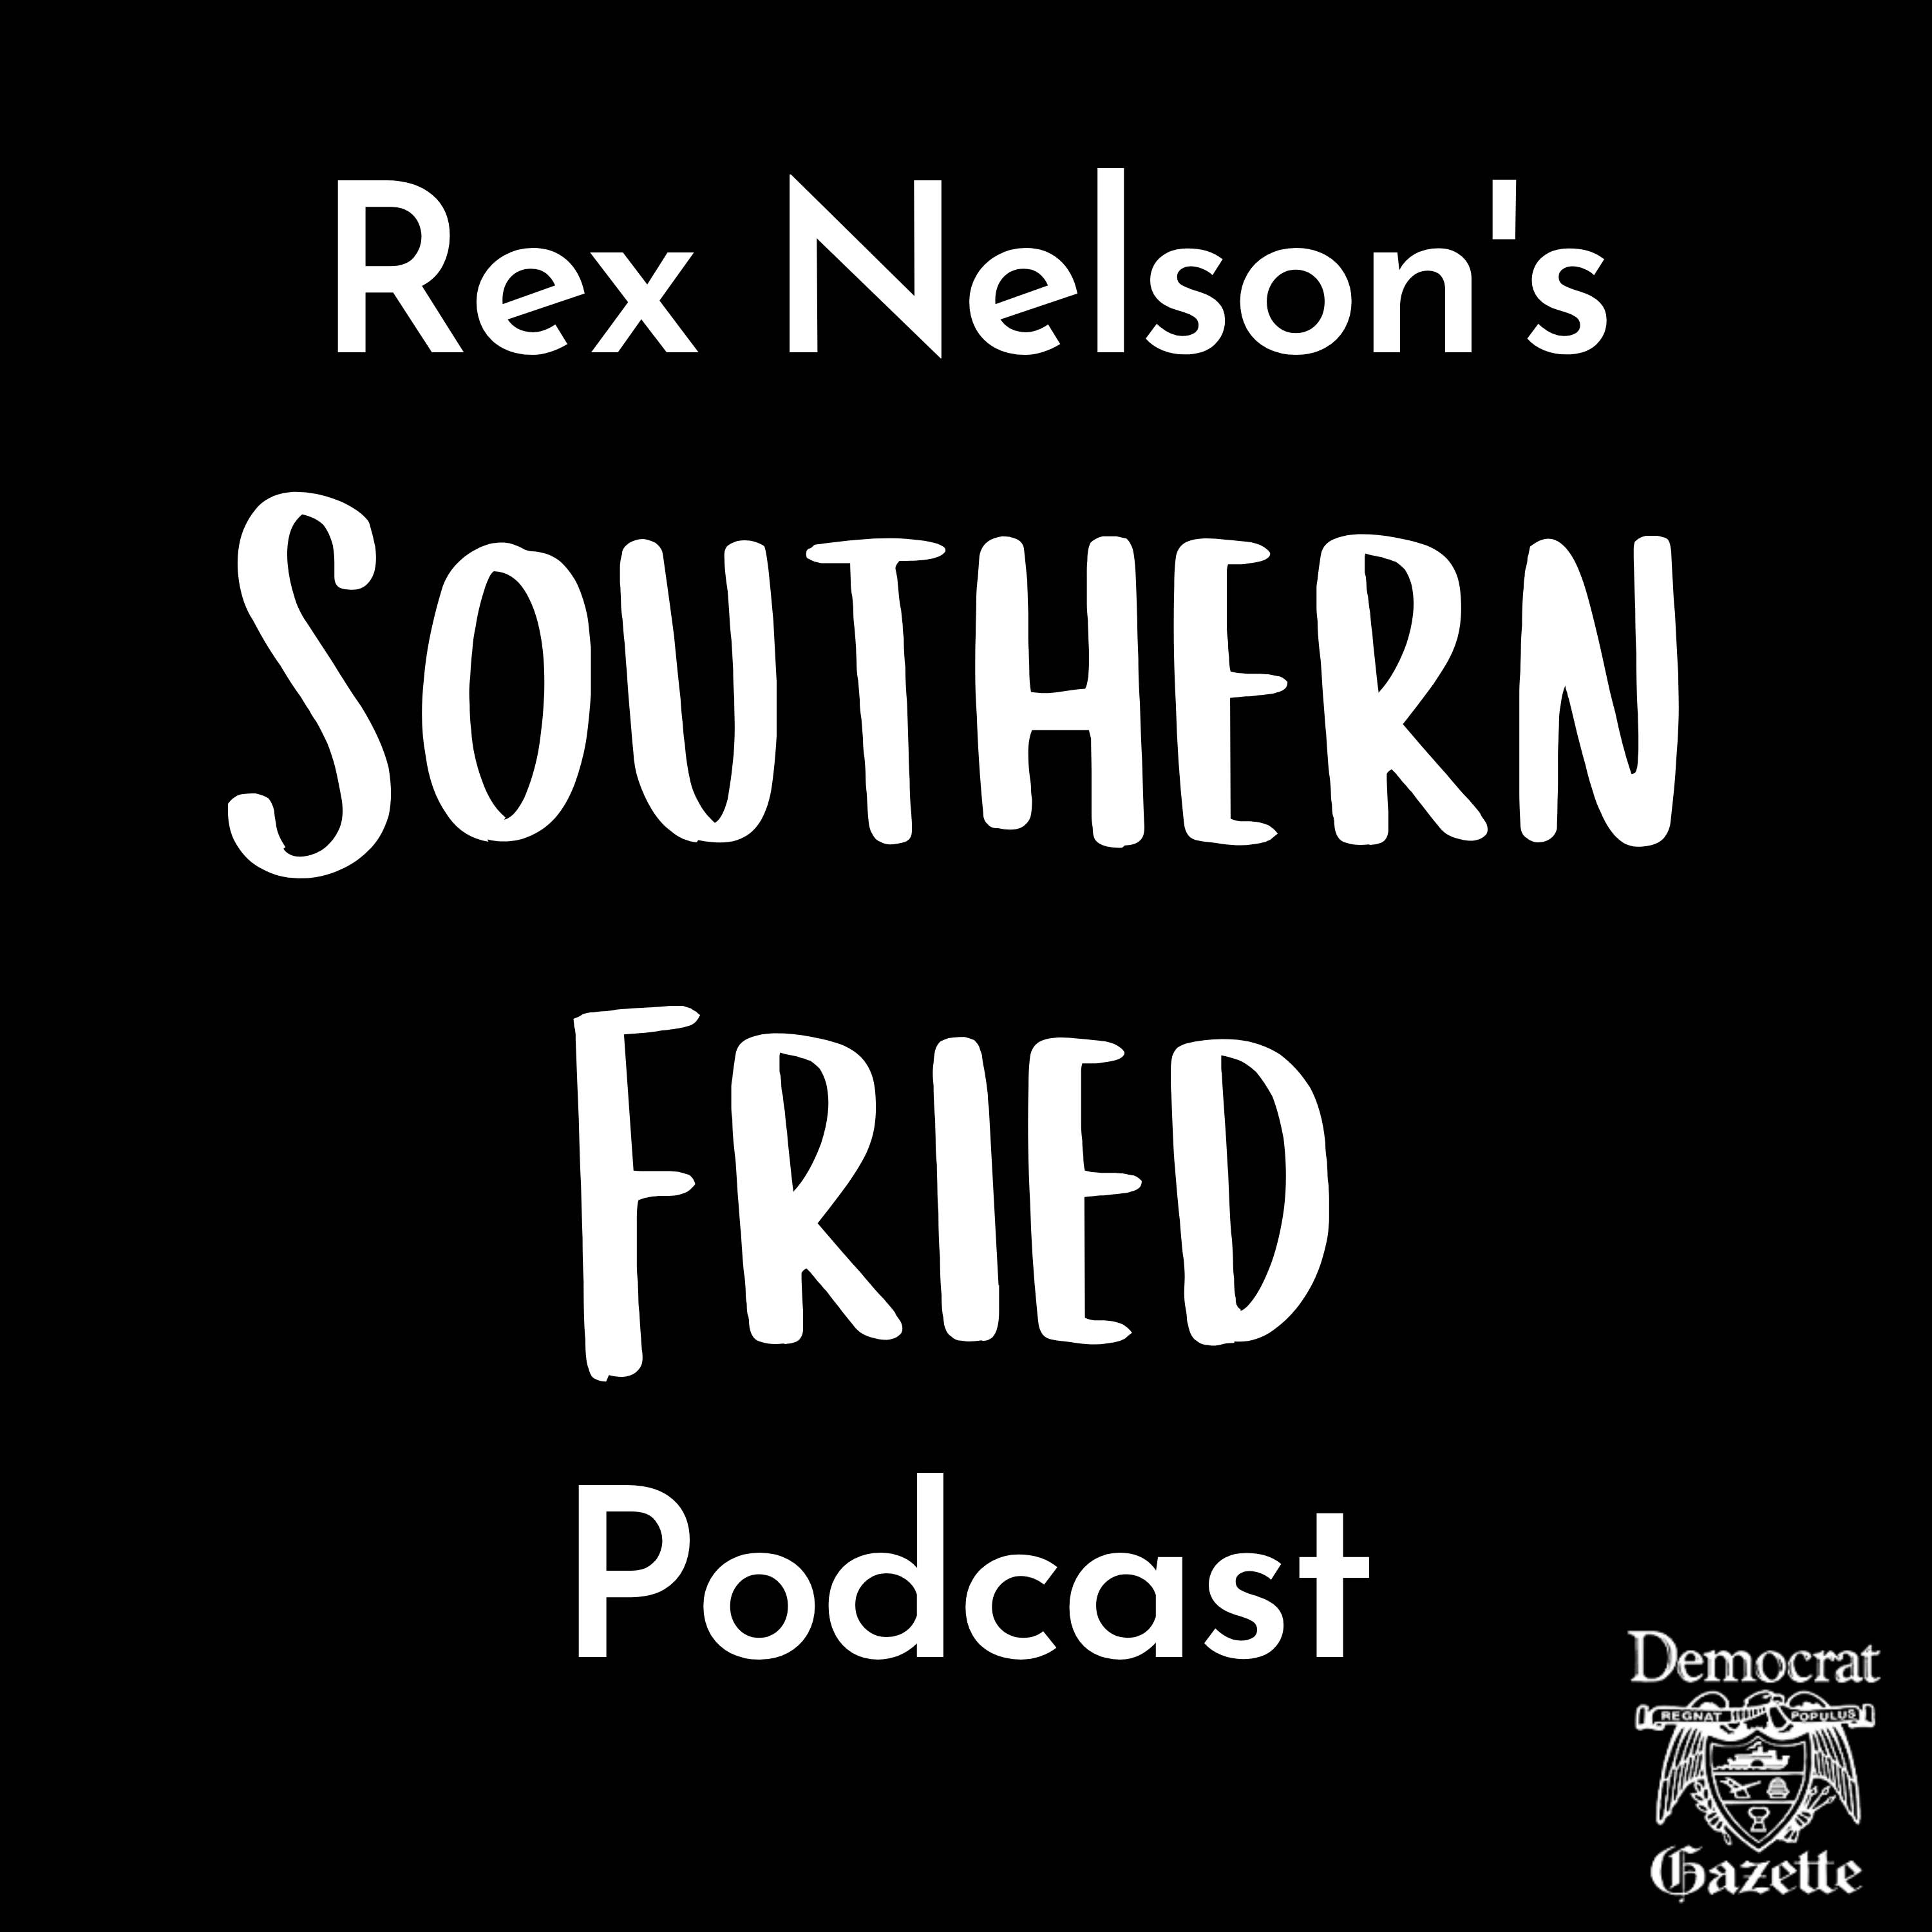 Rex Nelson's Southern Fried Podcast: 2022 predictions with Skip Rutherford